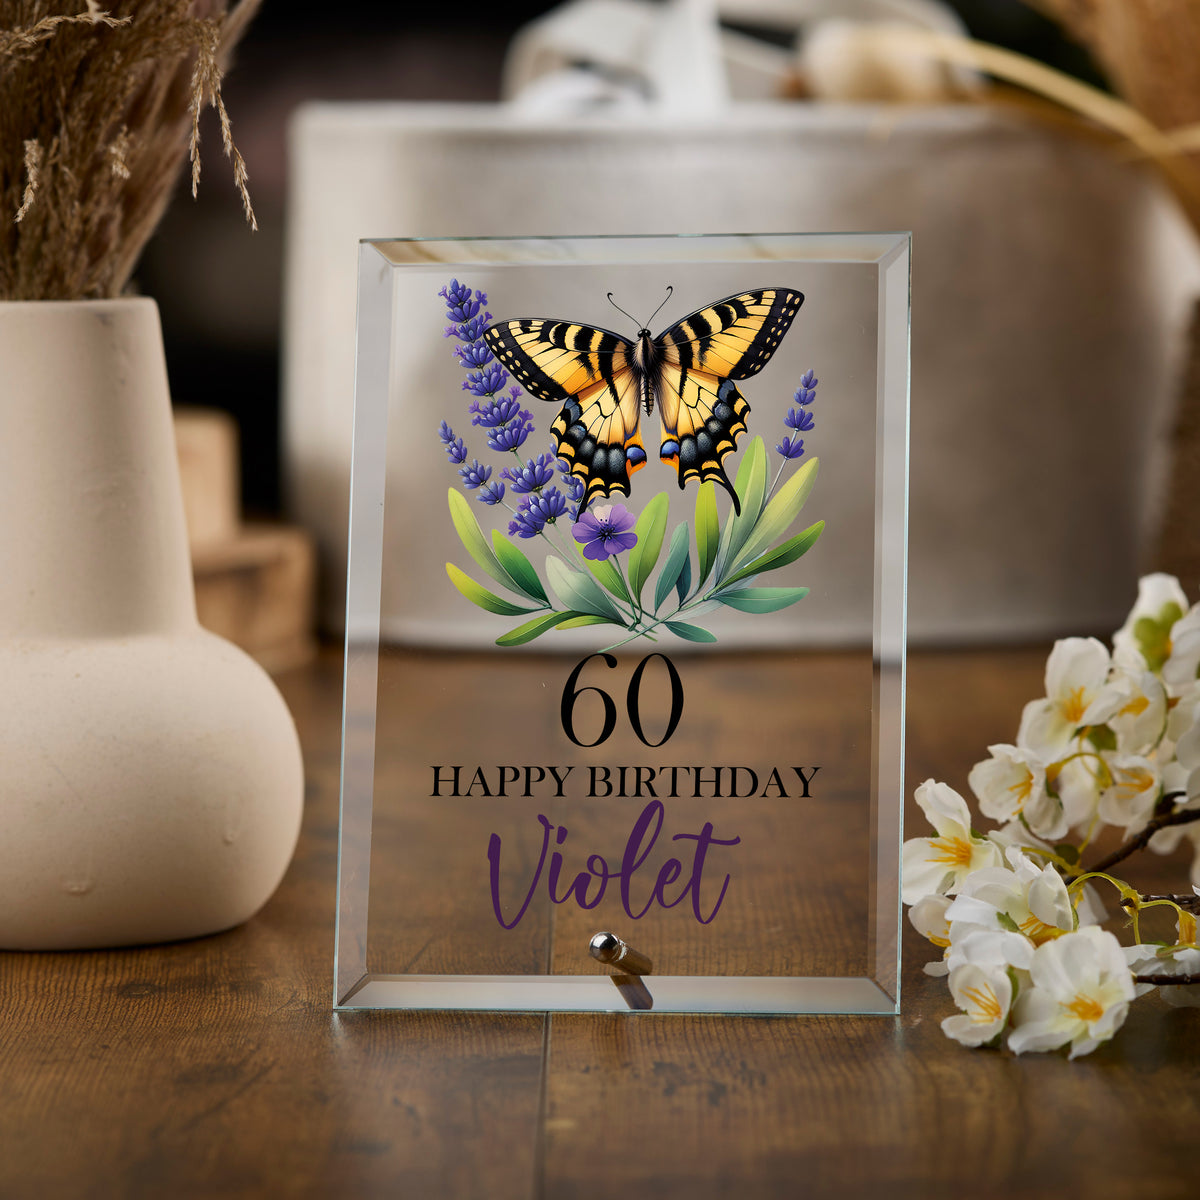 Personalised 60th Birthday Glass Plaque Gift With Butterflies